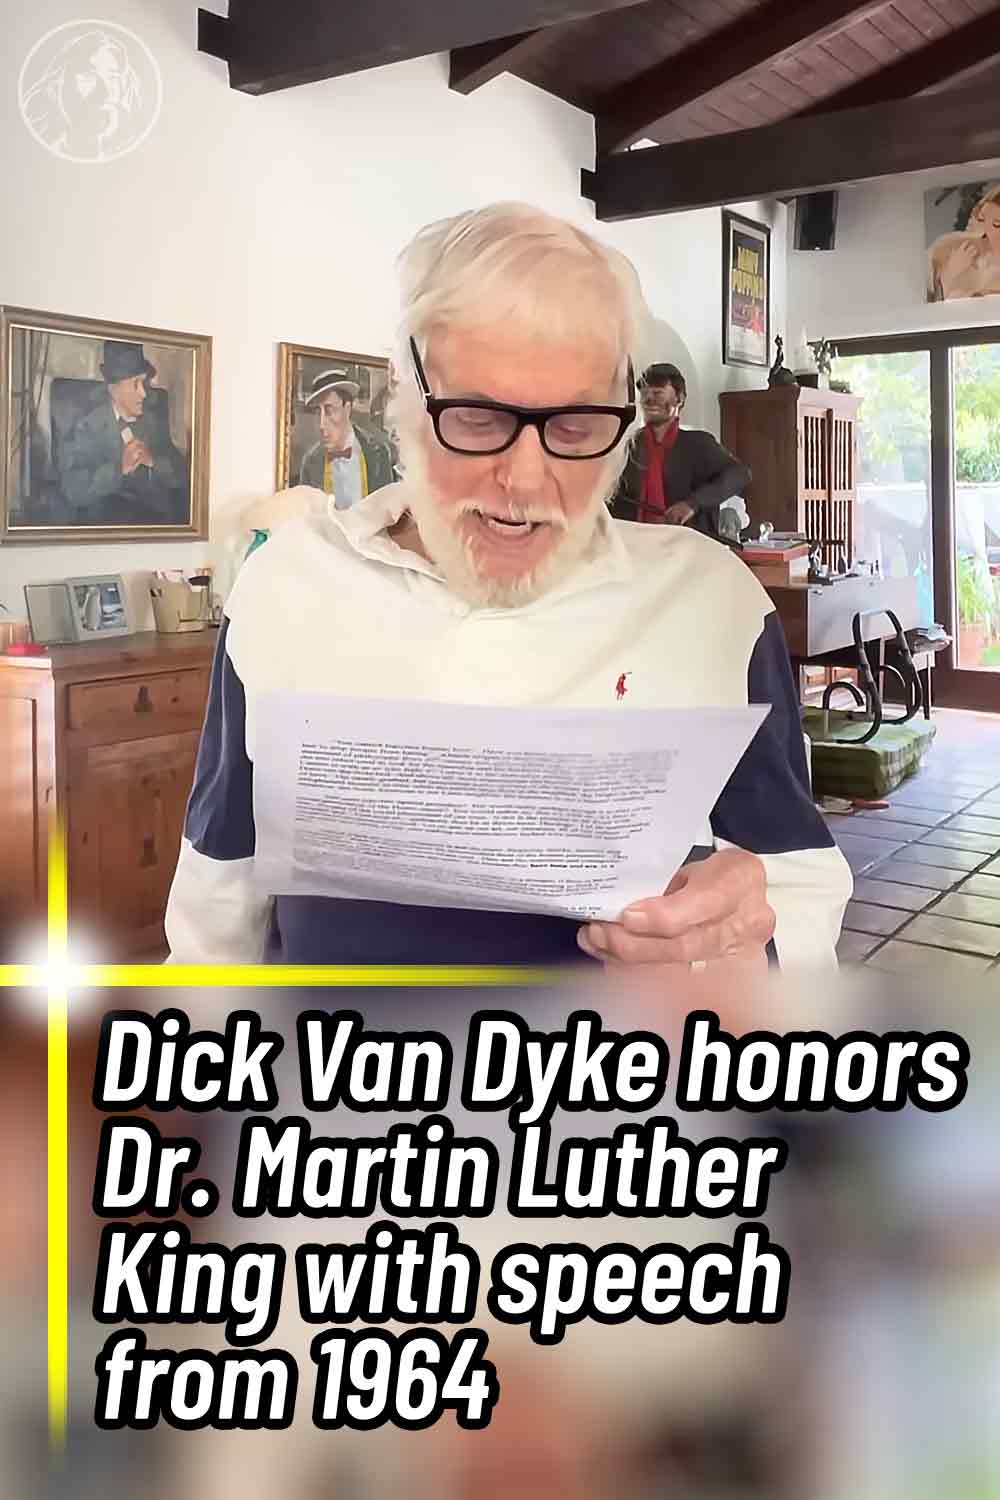 Dick Van Dyke honors Dr. Martin Luther King with speech from 1964